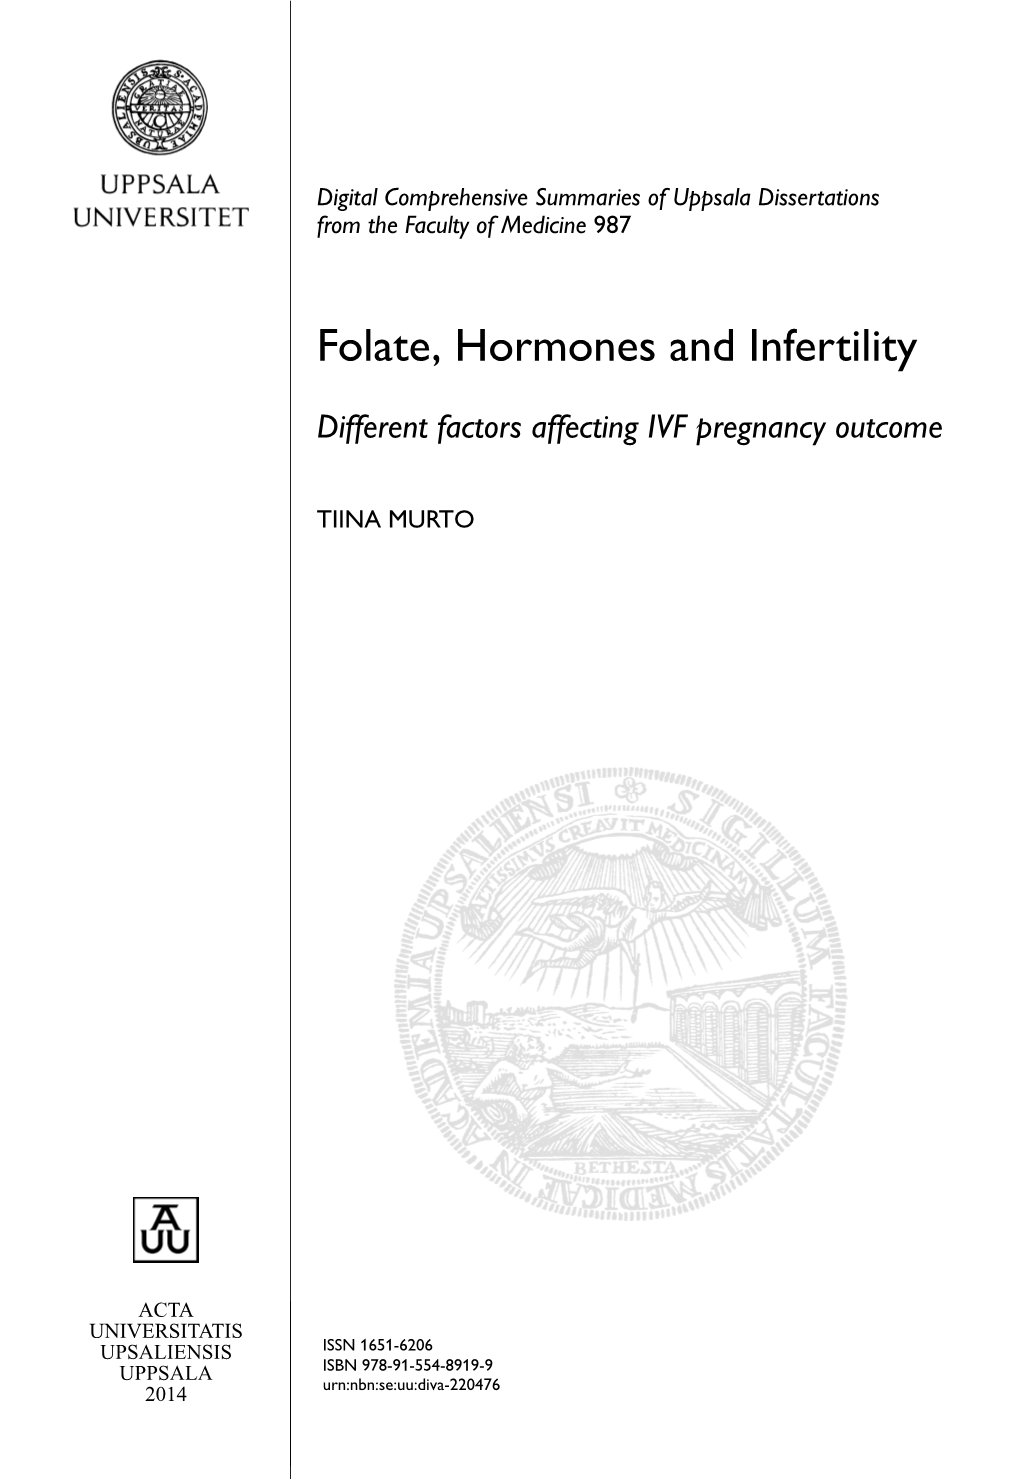 Folate, Hormones and Infertility